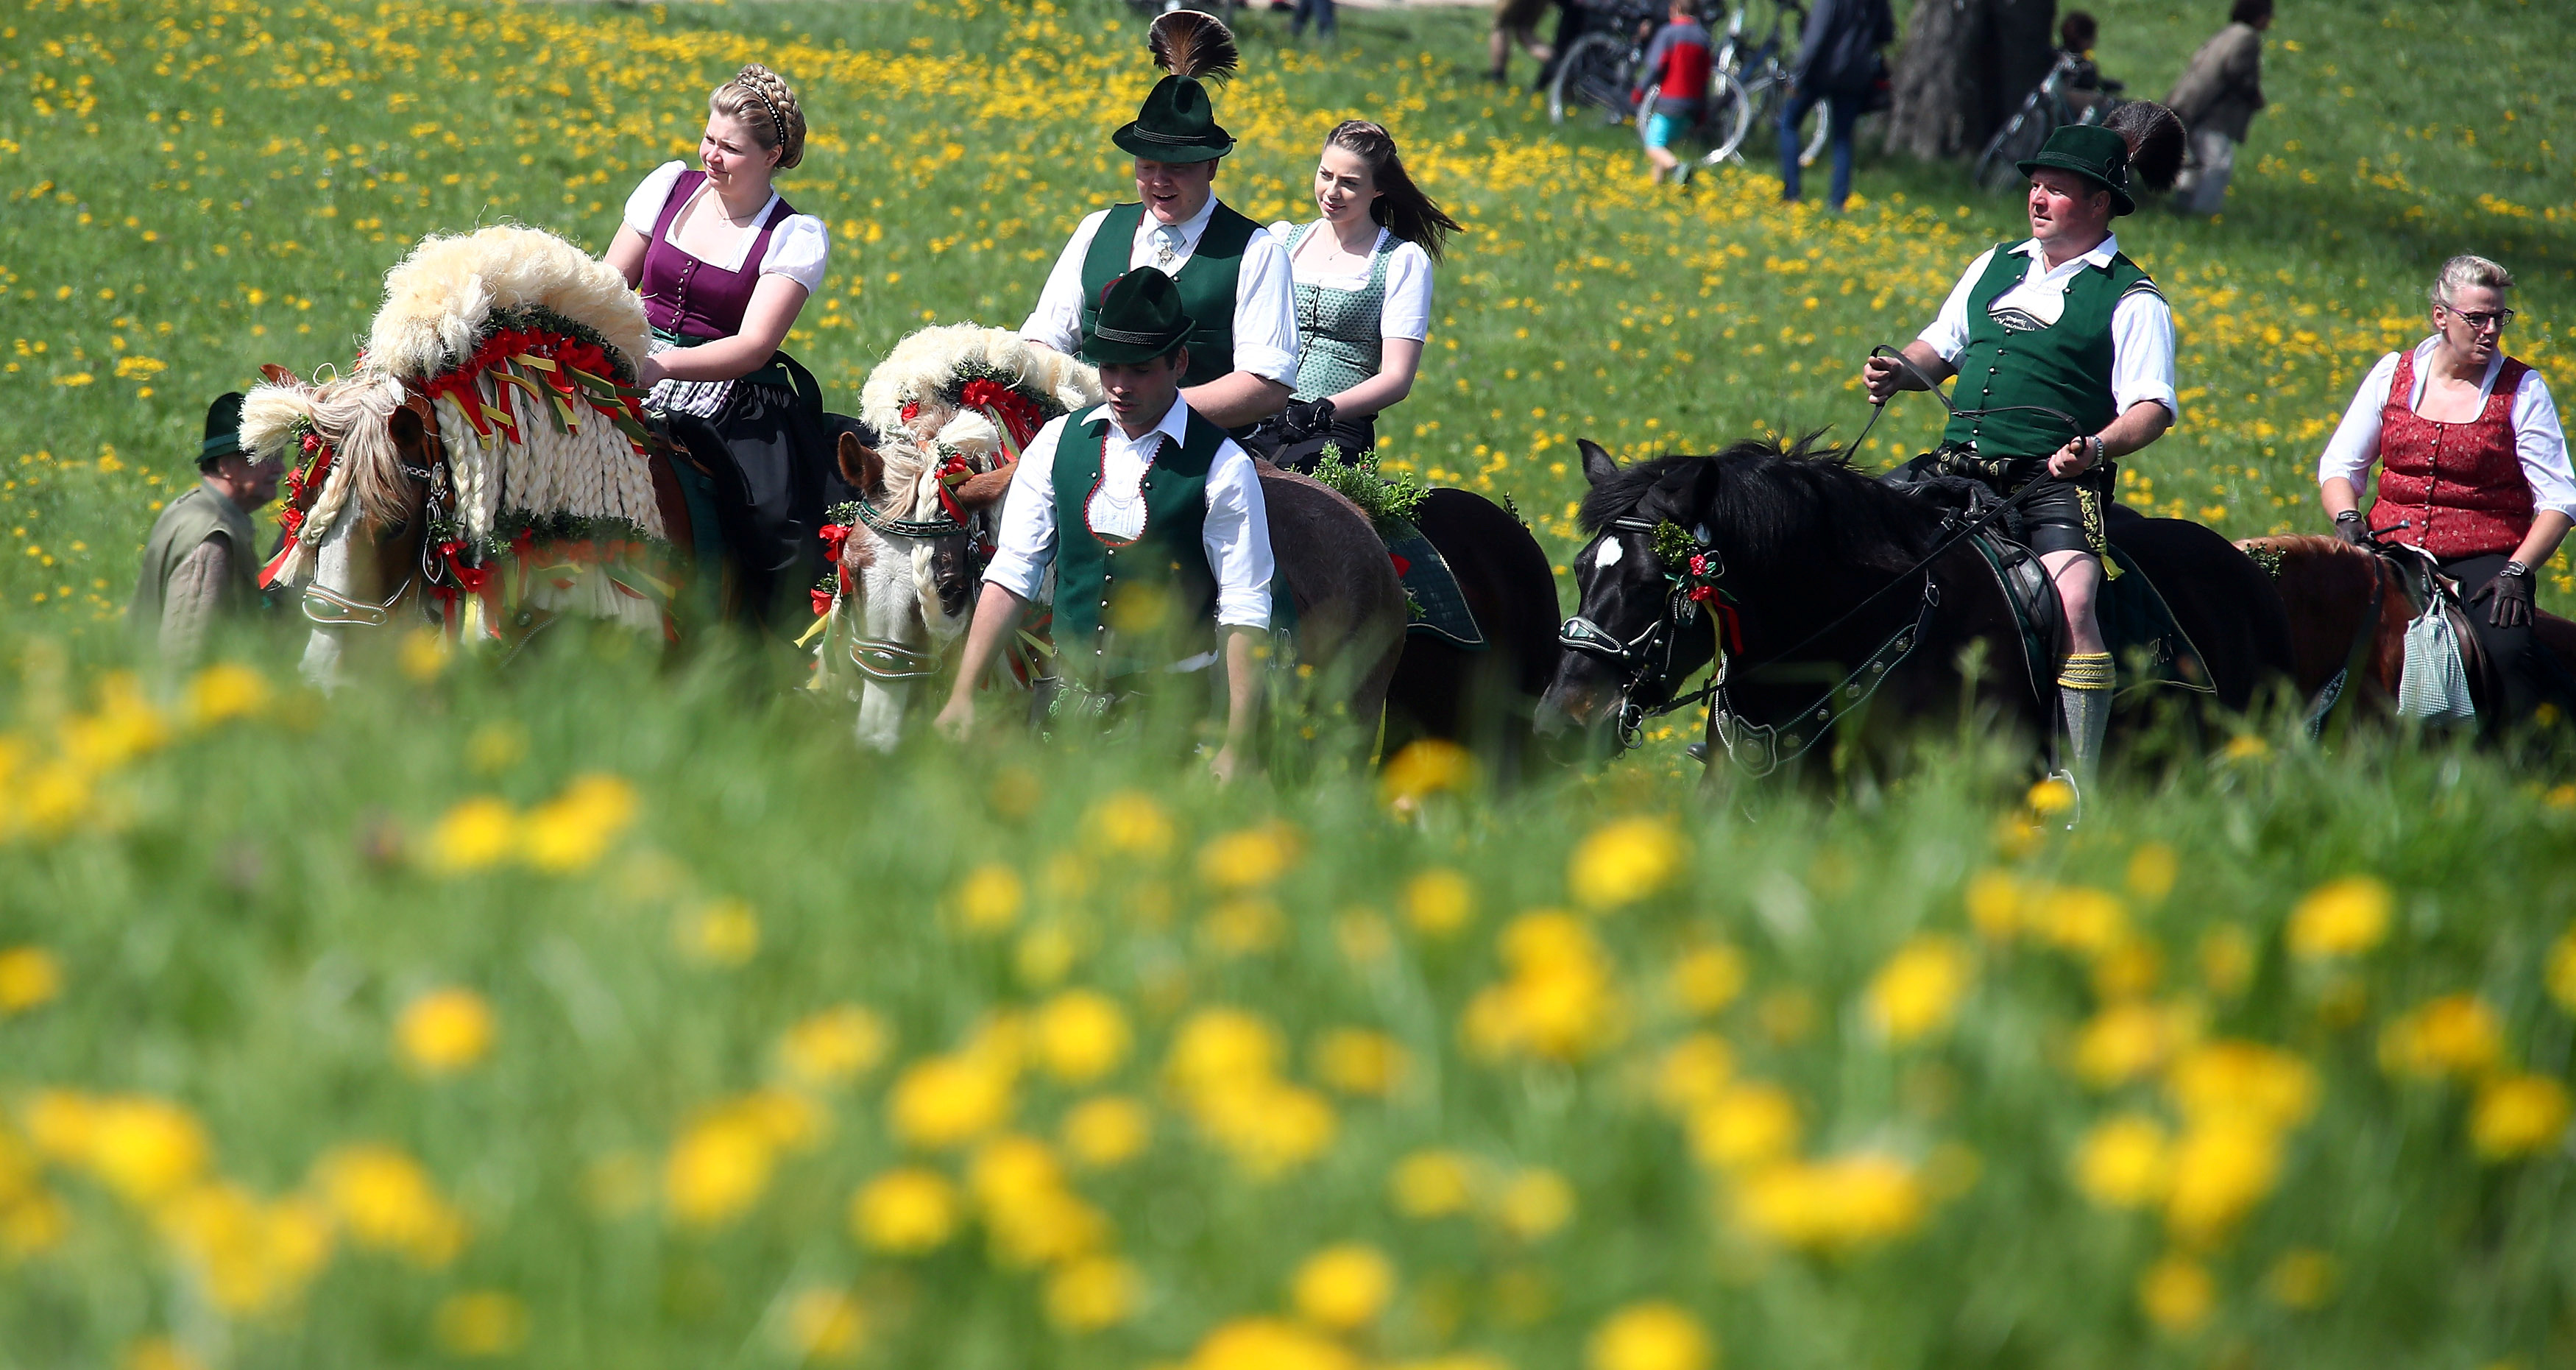 Pilgrims dressed in traditional clothes attend Georgi horse riding procession in Traunstein